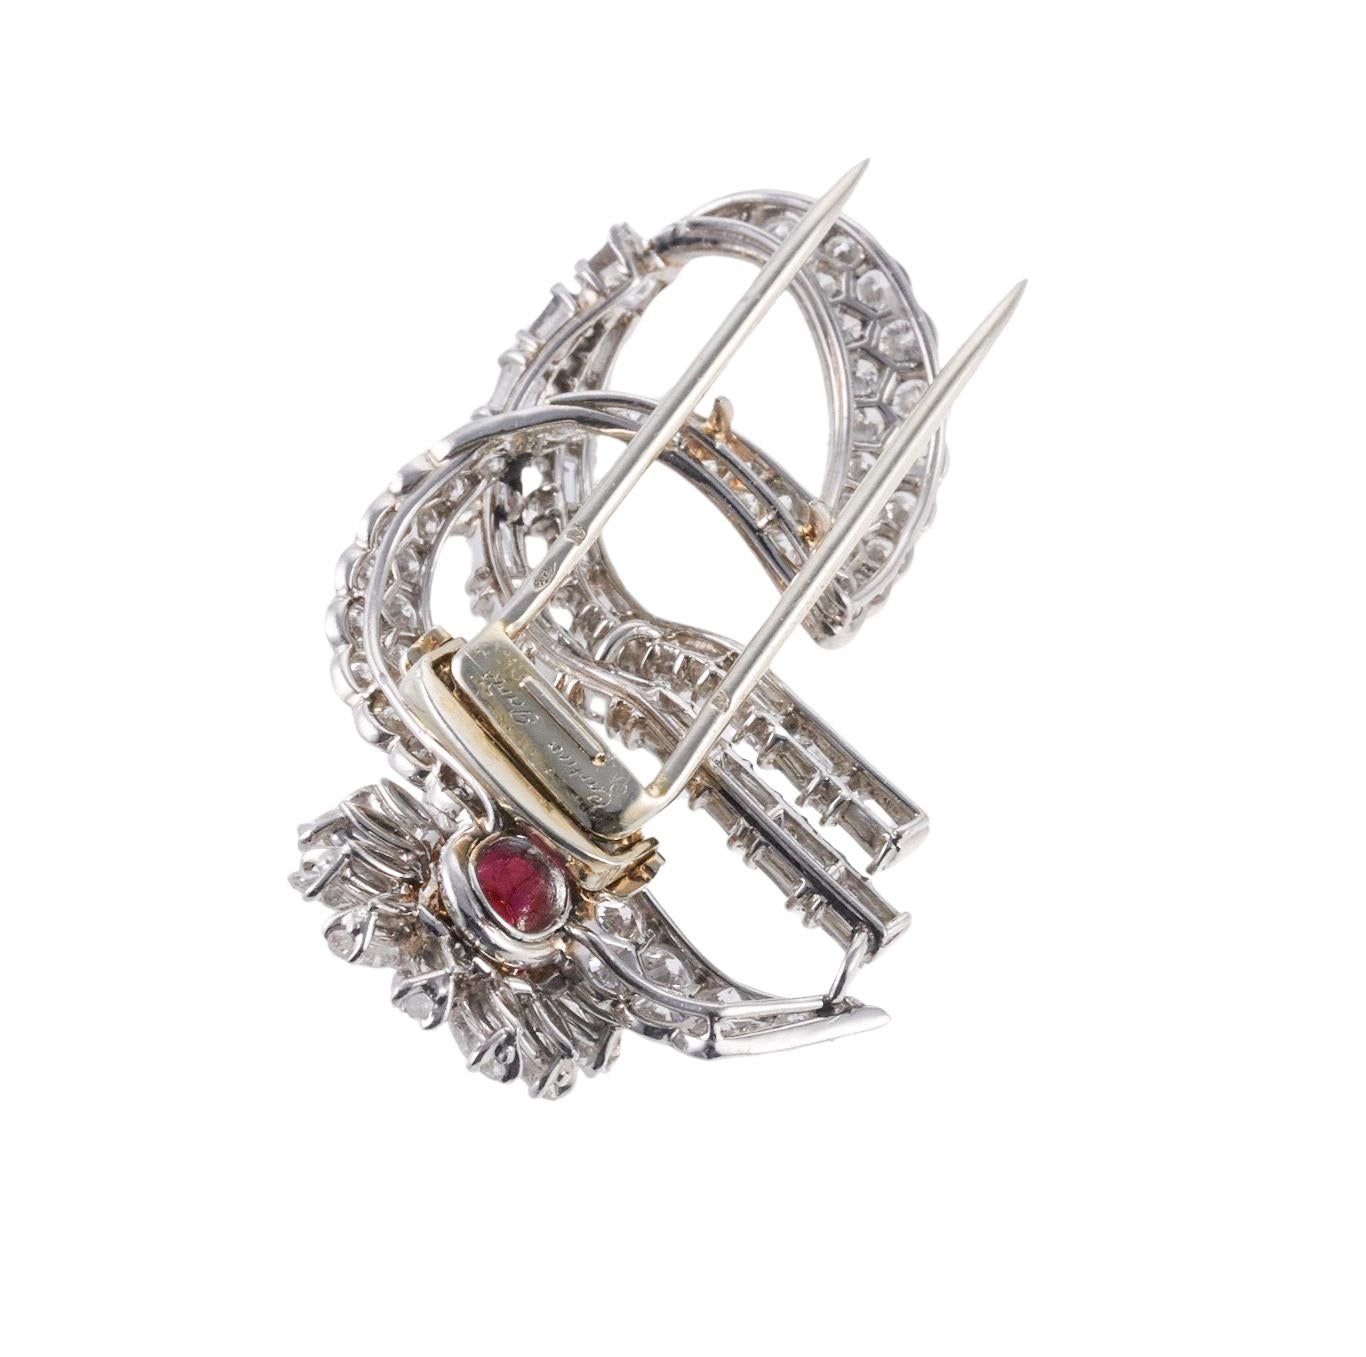 Exquisite platinum and gold Cartier Paris flower brooch, set with center oval ruby (approx. 6.5 x 5.4mm), surrounded with a total of approximately 6.00 carats in G/VS diamonds. Brooch measures 48mm x 26mm. Marked with plat and gold punchmarks on the